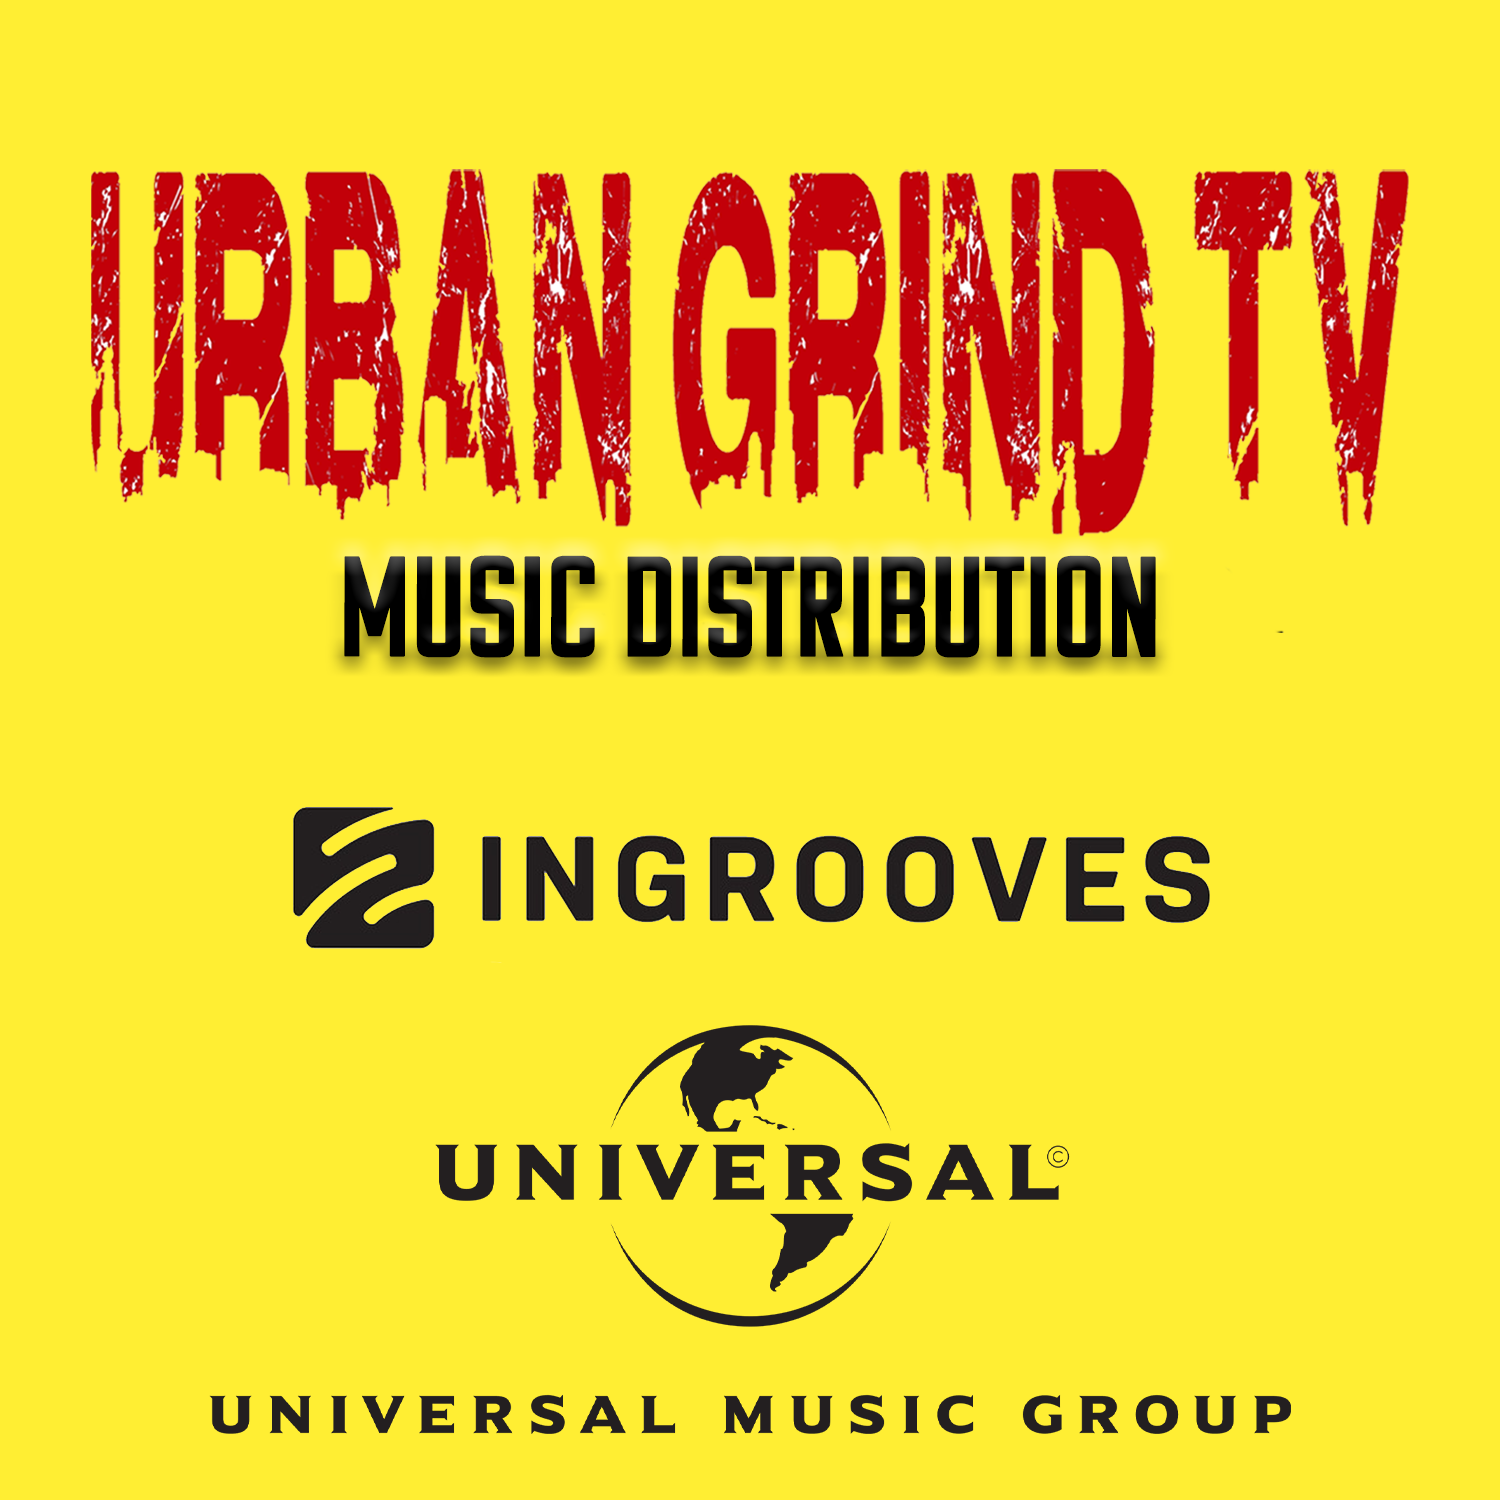 Urban Grind TV Launches Urban Grind TV Music Distribution via Universal Music Group/Ingrooves